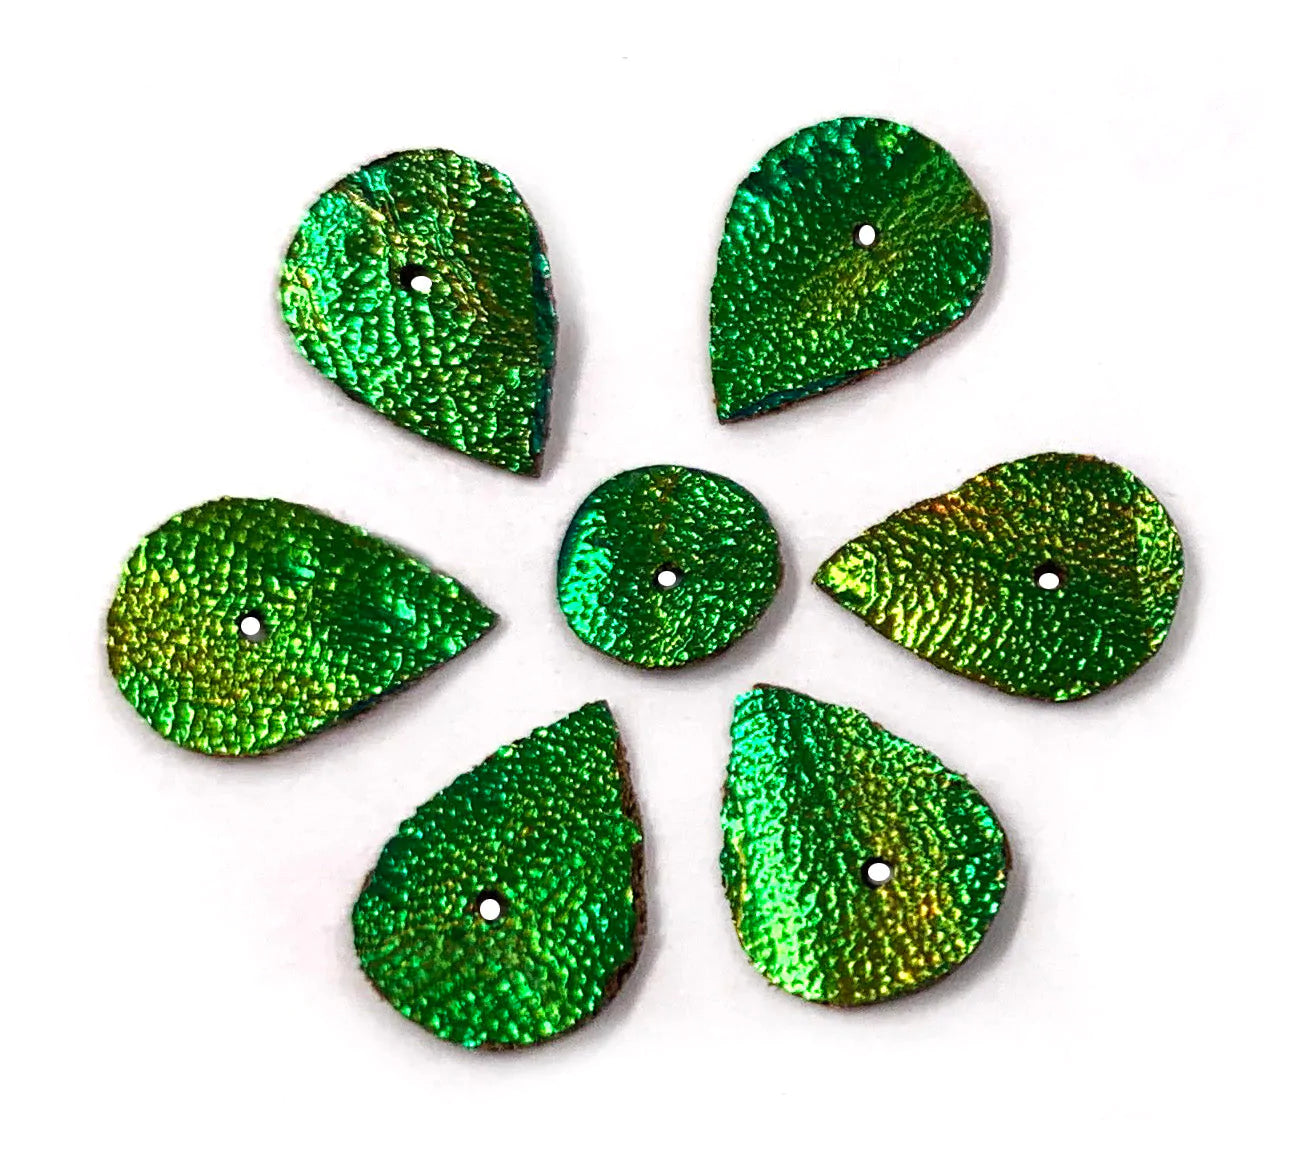 Jewel Beetle Wings DRILLED with HOLE 100 Pcs Natural Wings - Raindrop 1 x 0.5 CM